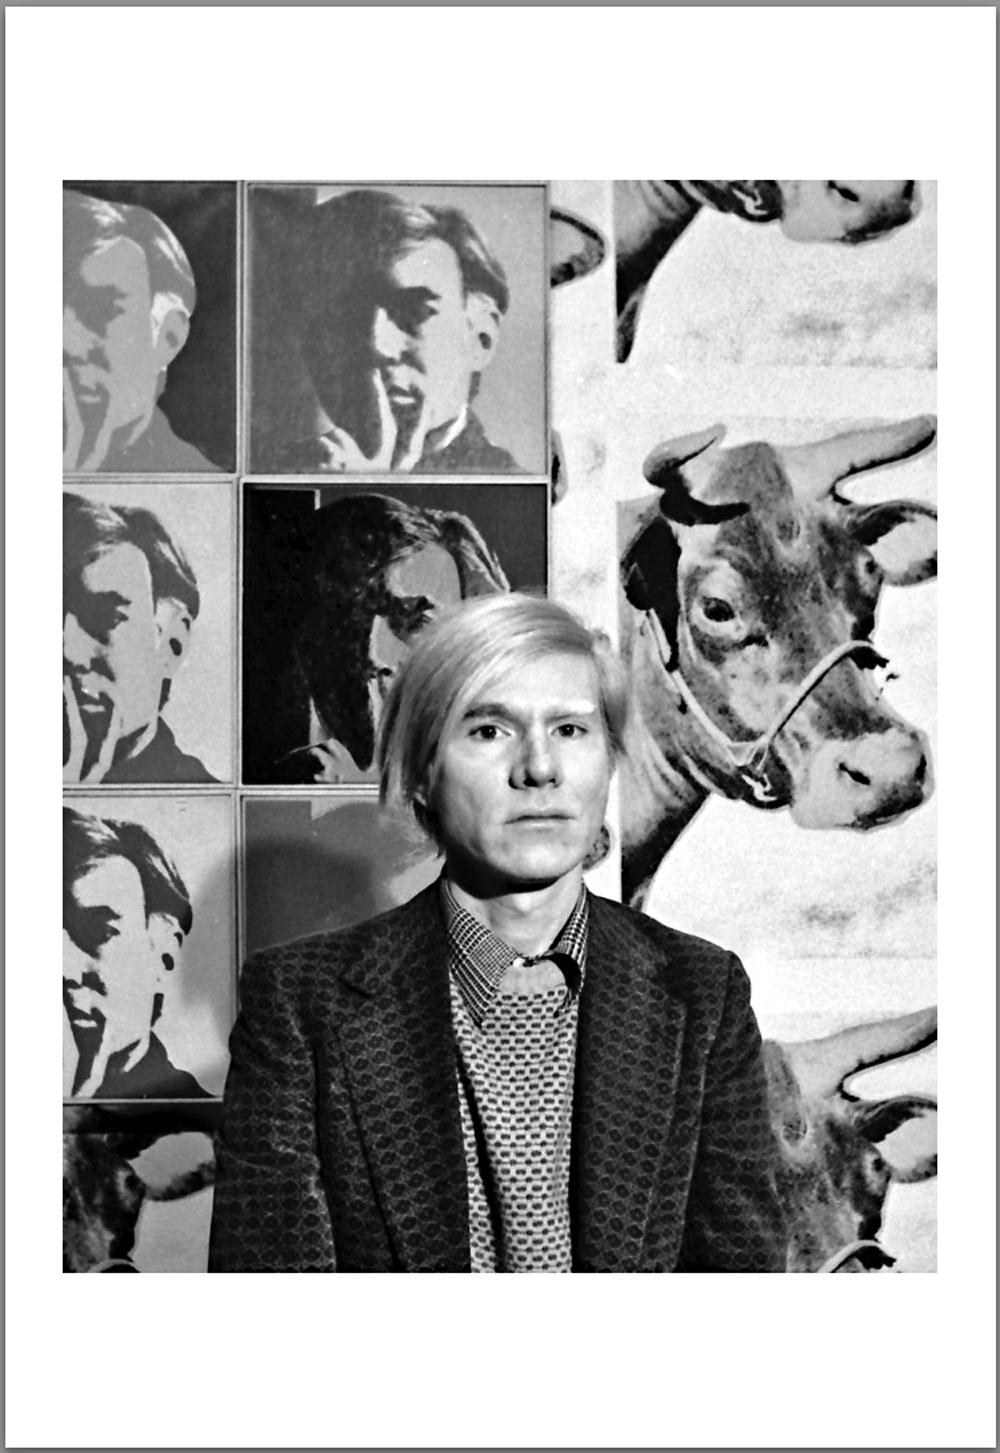 Jack Mitchell Black and White Photograph - Andy Warhol & the Superstars - Limited Edition Portfolio of 10 Photographs